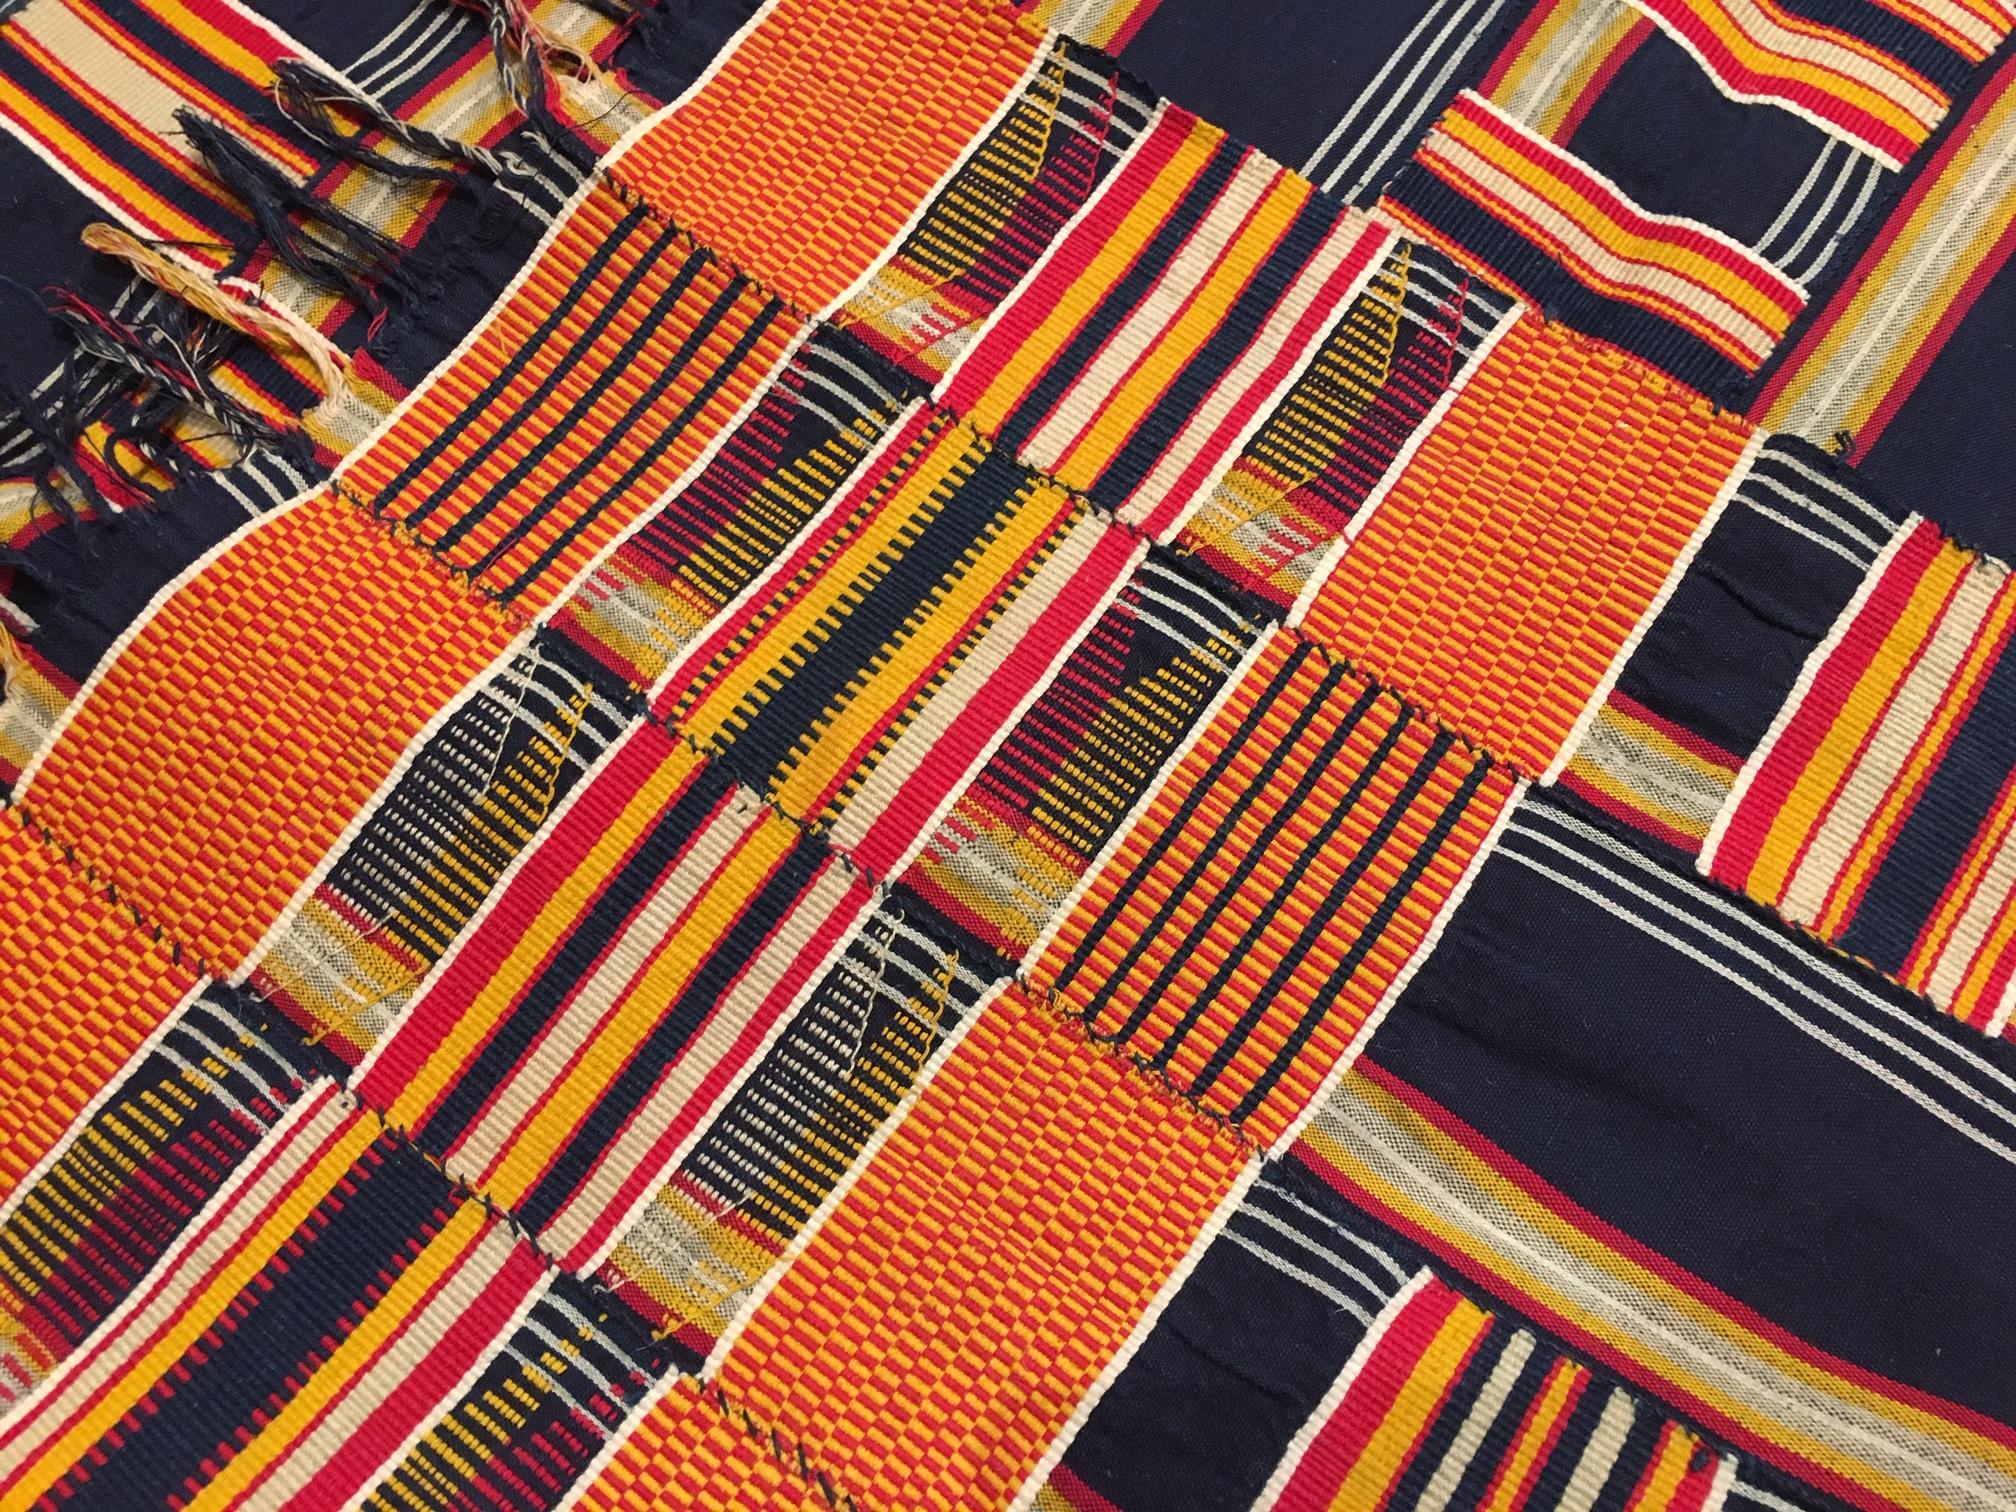 Hand-Woven Antique African Ewe Kente Textile. Size: 5 ft 9 in x 8 ft 7 in (1.75 m x 2.62 m)